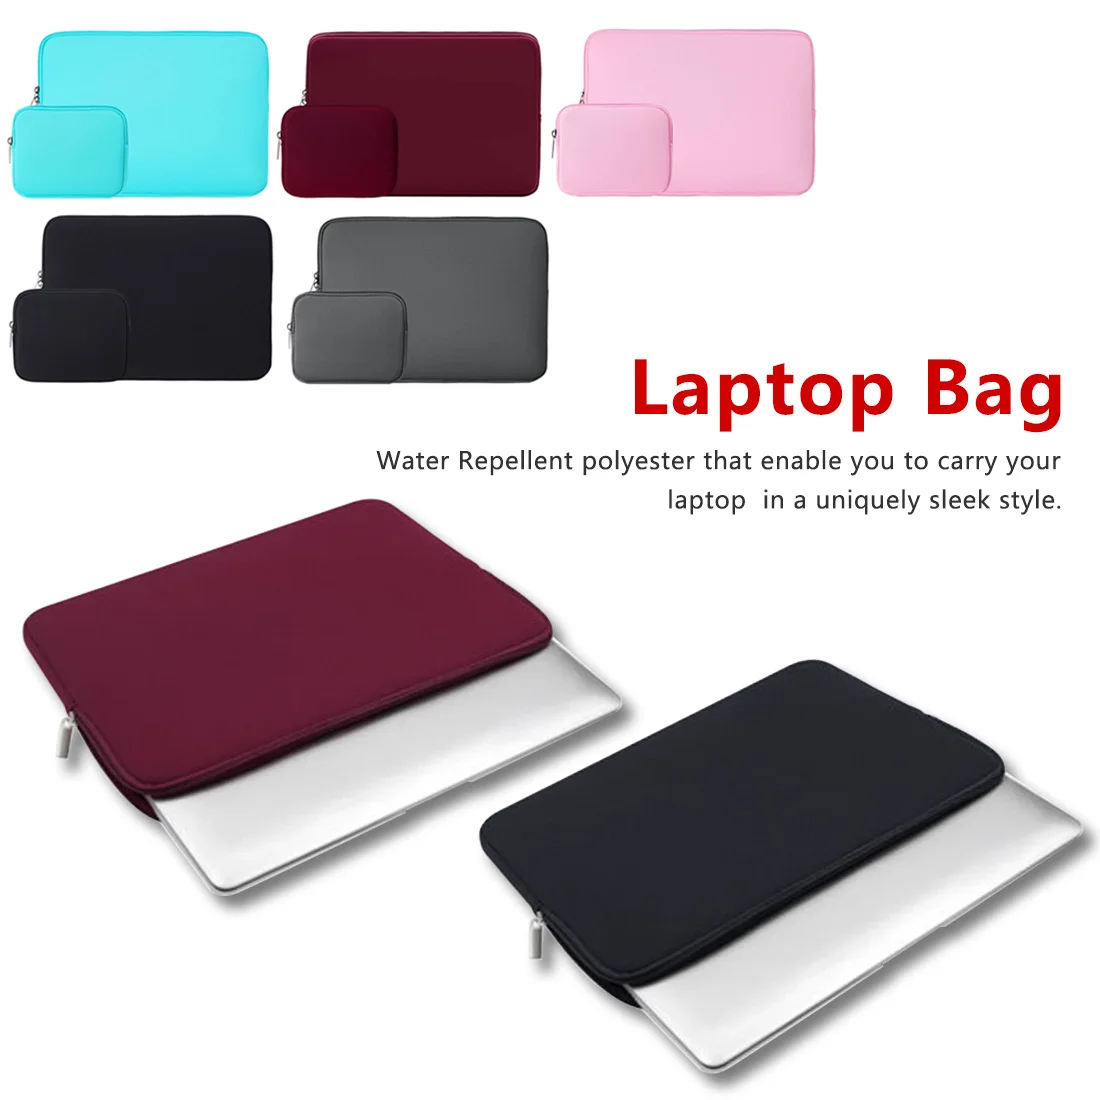 

11" 13" 14" 15" 15.6" 14 inch Laptop Notebook Case for Macbook Pro Air Retina Tablet Sleeve Cover Bag for Xiaomi Huawei HP Dell